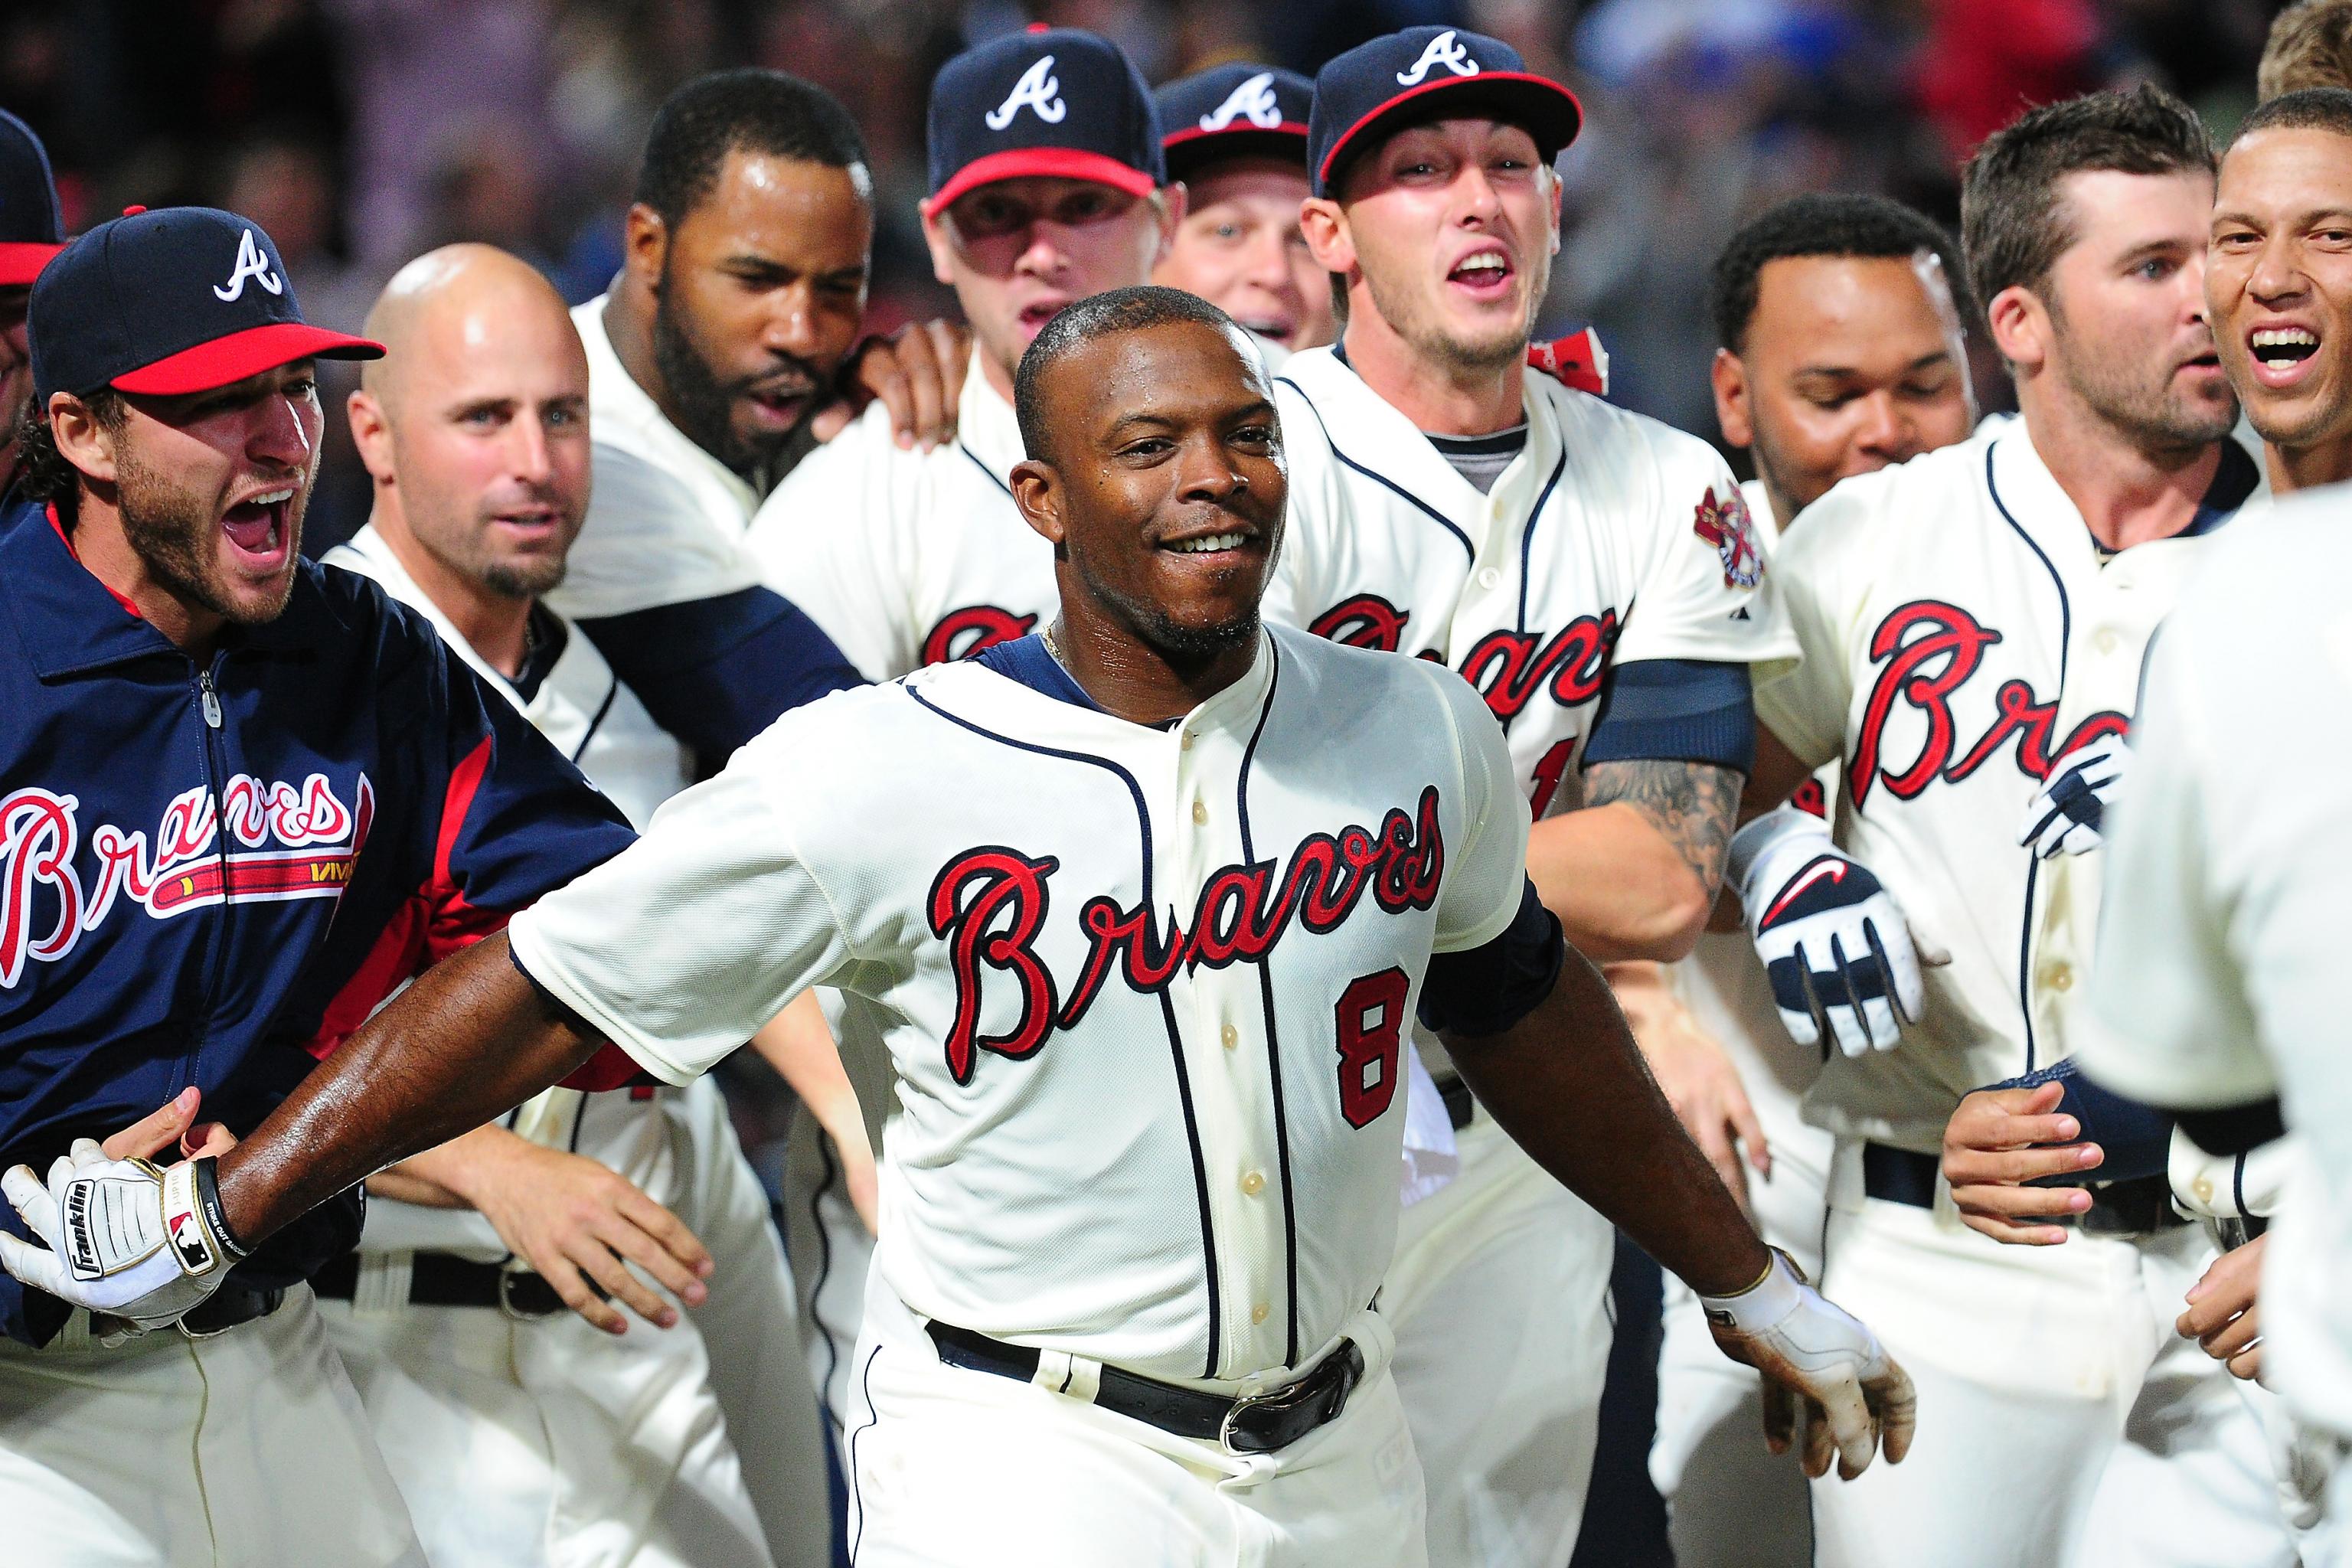 The Atlanta Braves are the hottest team in Baseball 